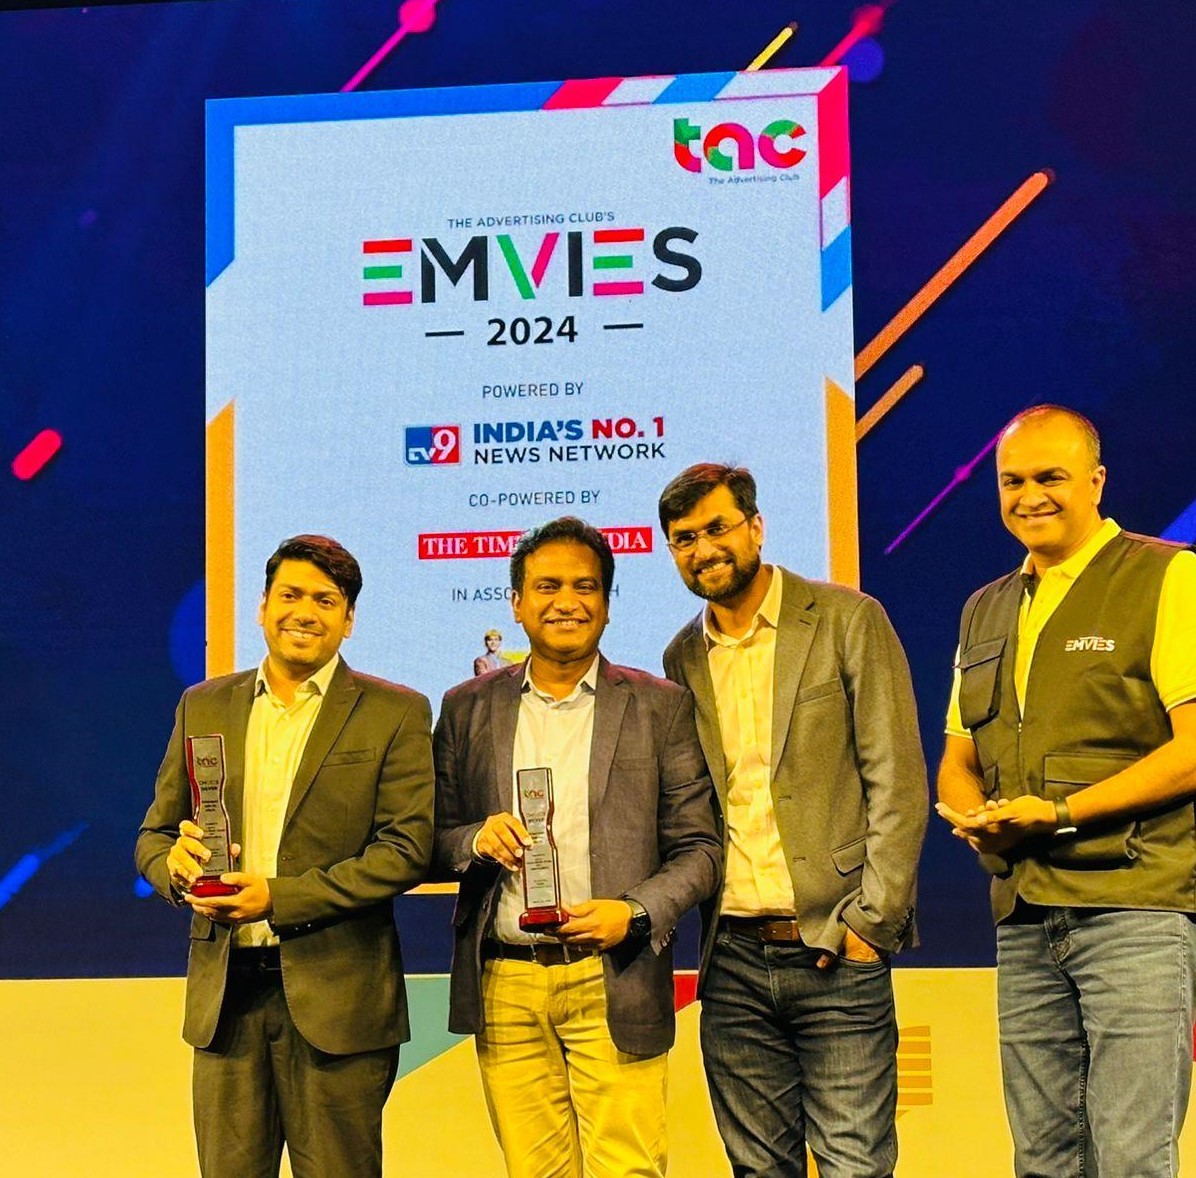 Congratulations to our incredible teams for winning big at the prestigious #EMVIES2024! 👏

🥈x Best Media Research / Analytics using existing data for @dominos_india
🥉x Emvies for Good for @Swiggy 
🥉x Best Media Innovation- Events/Experiential Marketing for Swiggy

#HavasProud